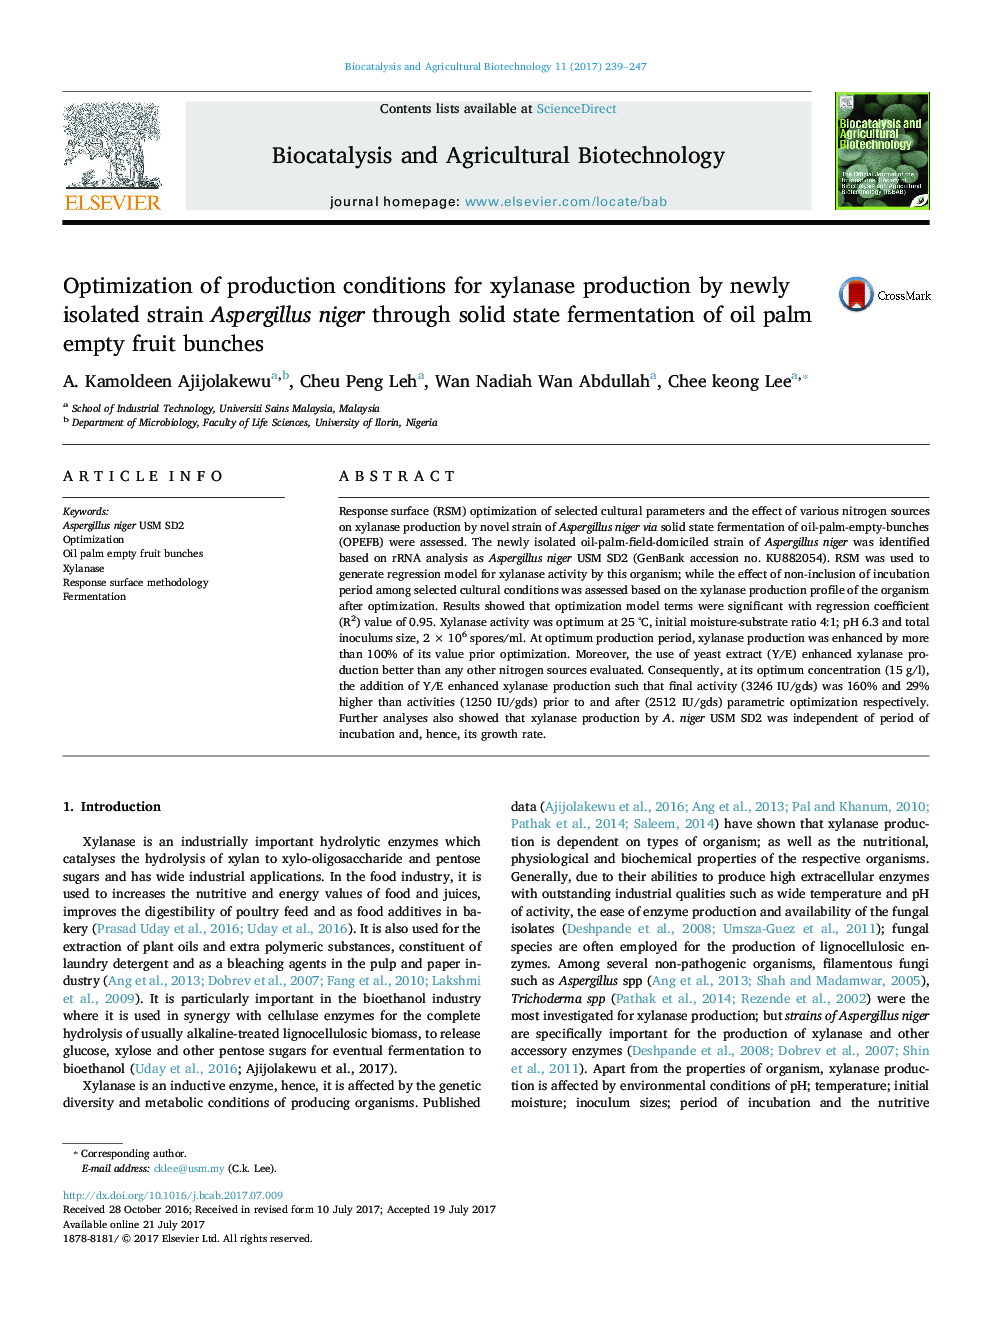 Optimization of production conditions for xylanase production by newly isolated strain Aspergillus niger through solid state fermentation of oil palm empty fruit bunches